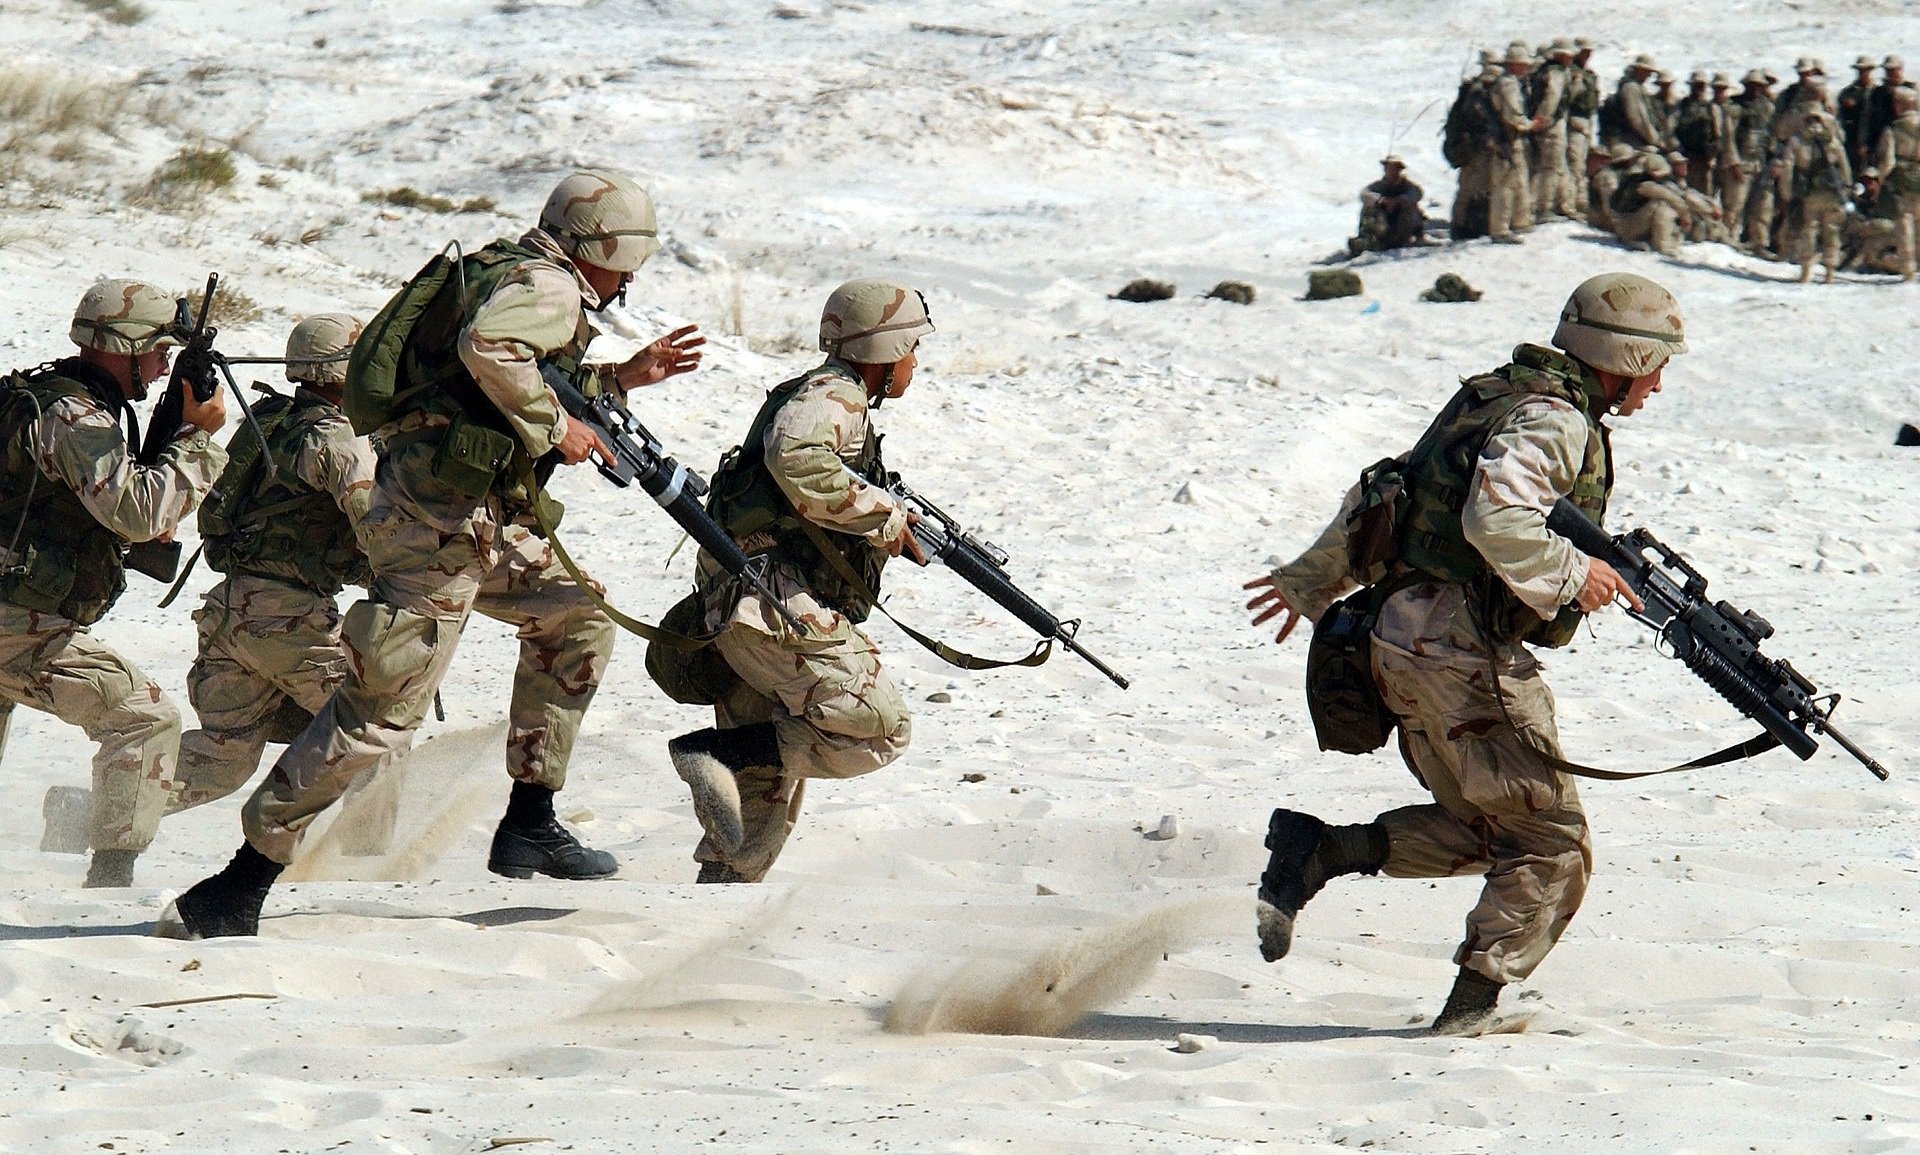 Soldiers carrying weapons running as part of training in the desert